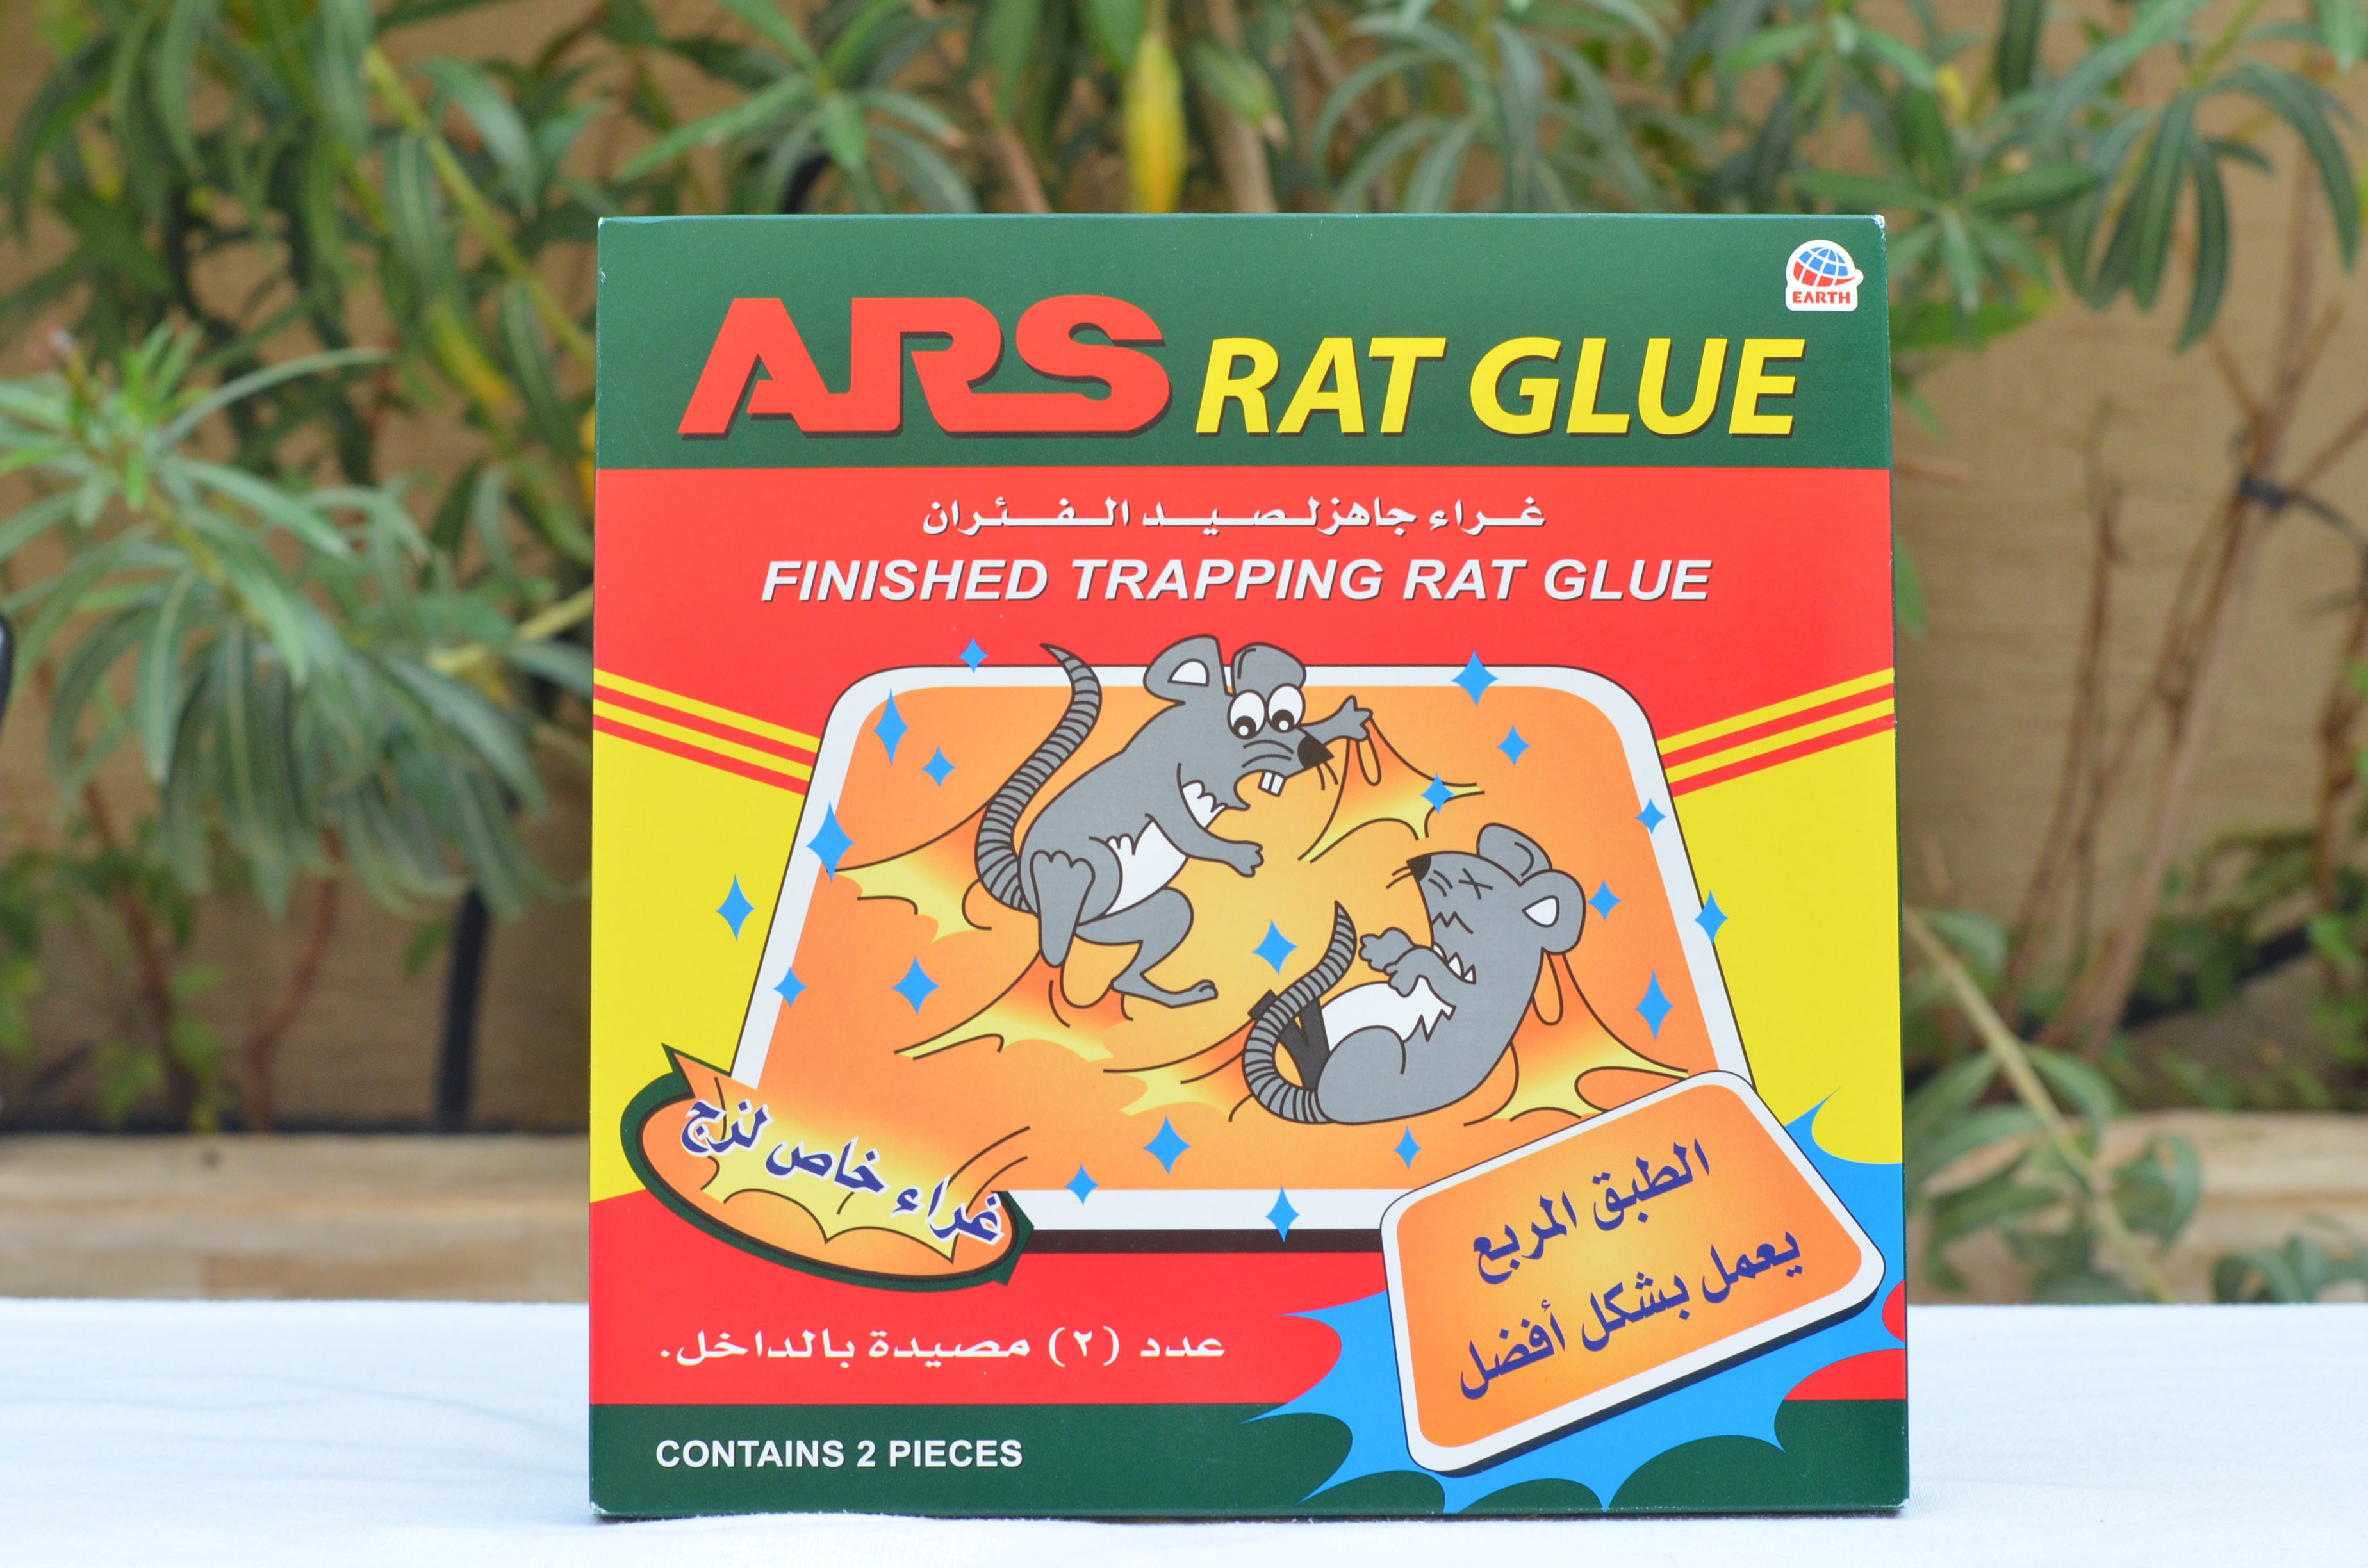 ARS RAT GLUE  Earth Act For Life